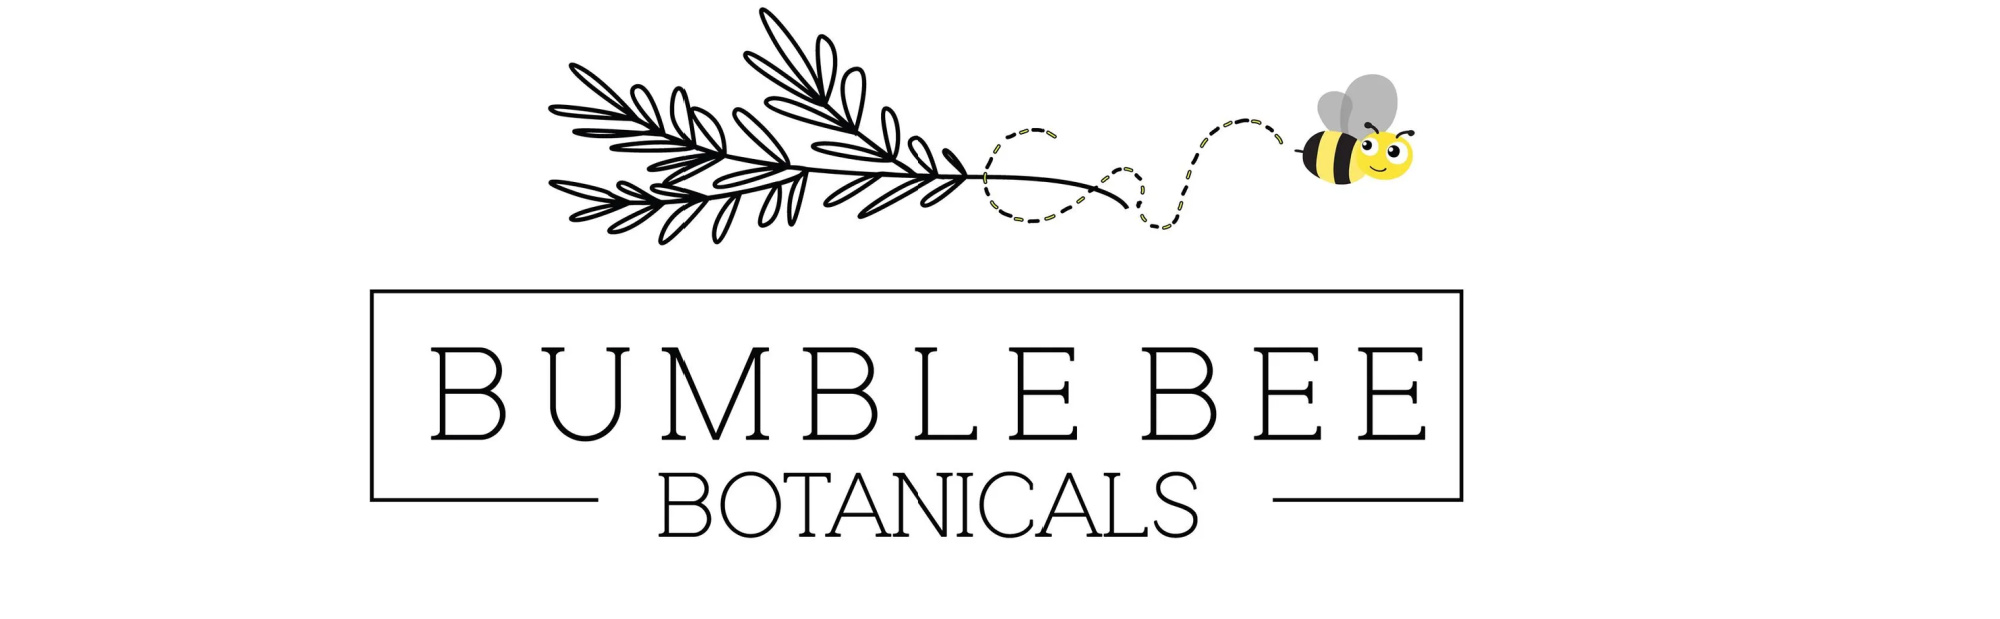 image of bumble bee botanicals in boise id